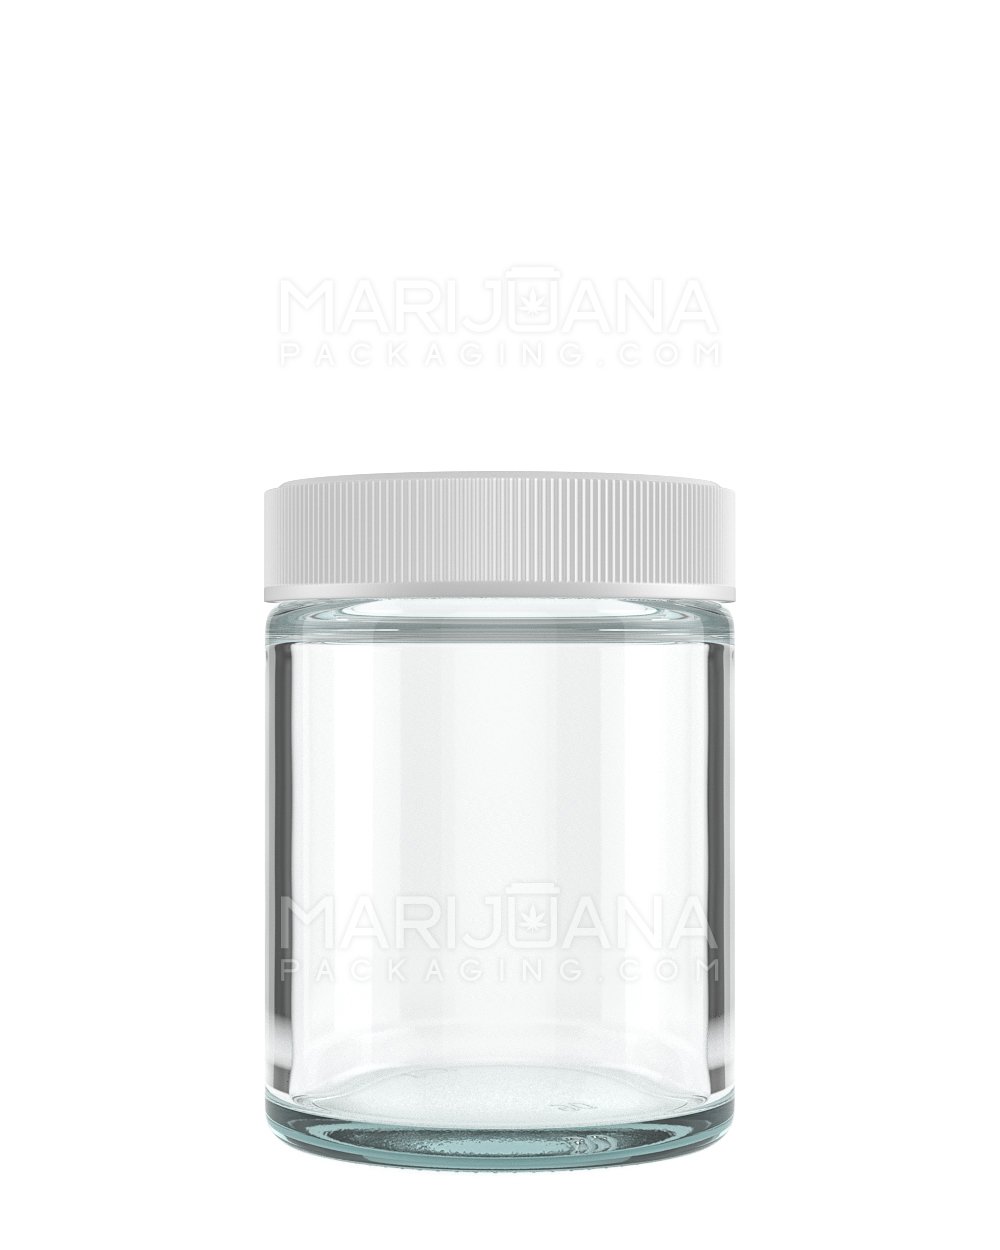 Straight Sided Clear Glass Jars with White Cap | 53mm - 4oz - 120 Count - 1